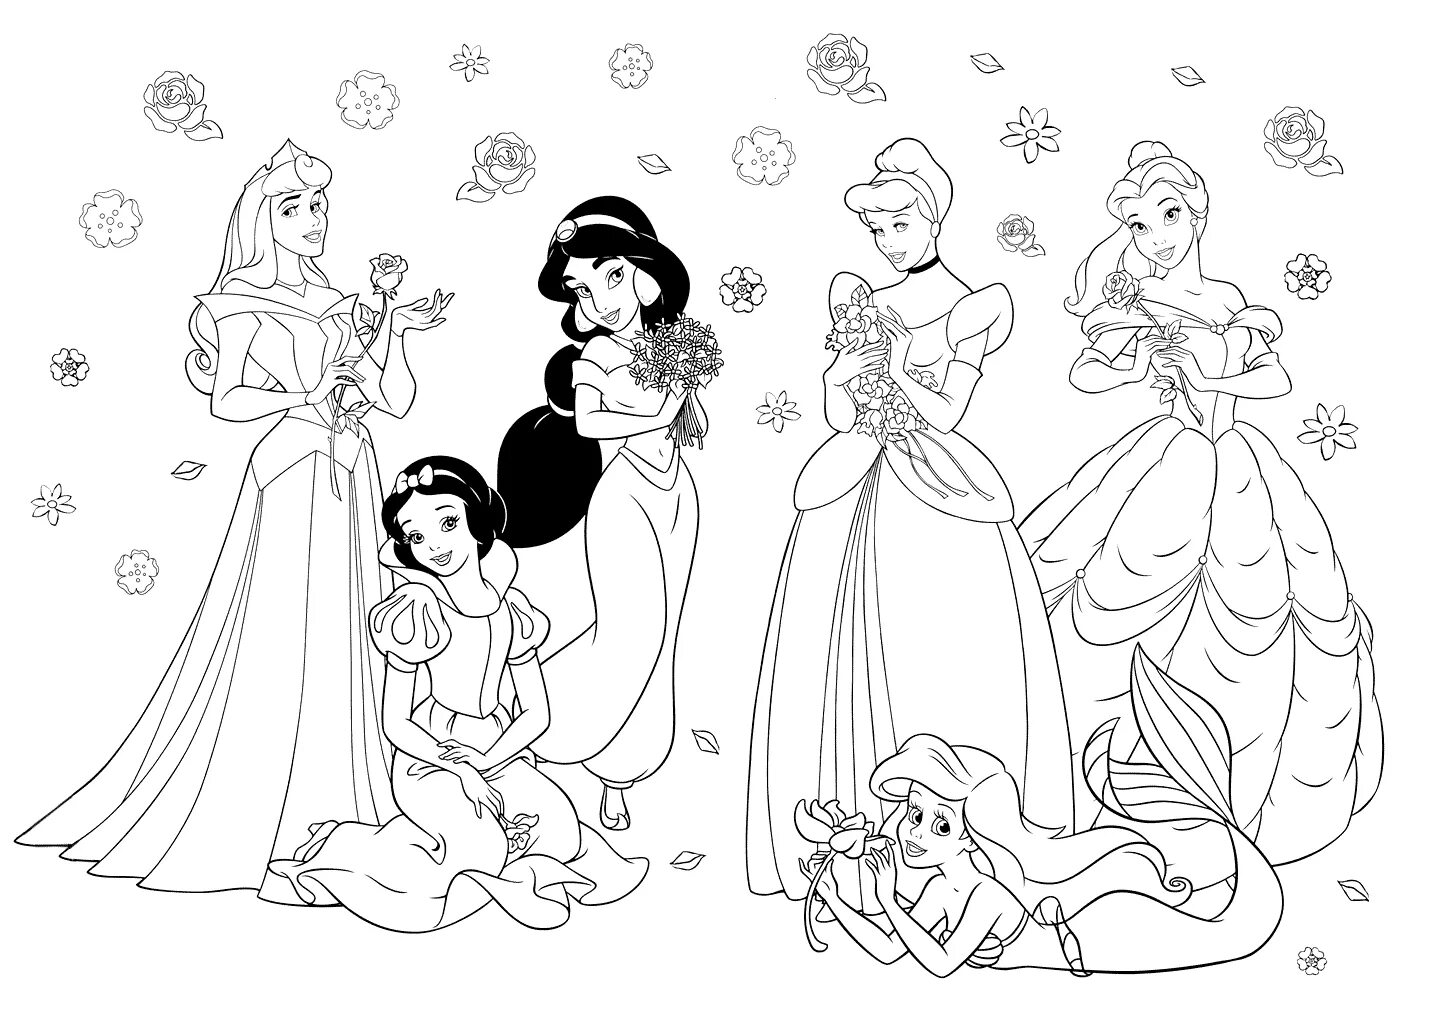 Amazing princess coloring book for kids